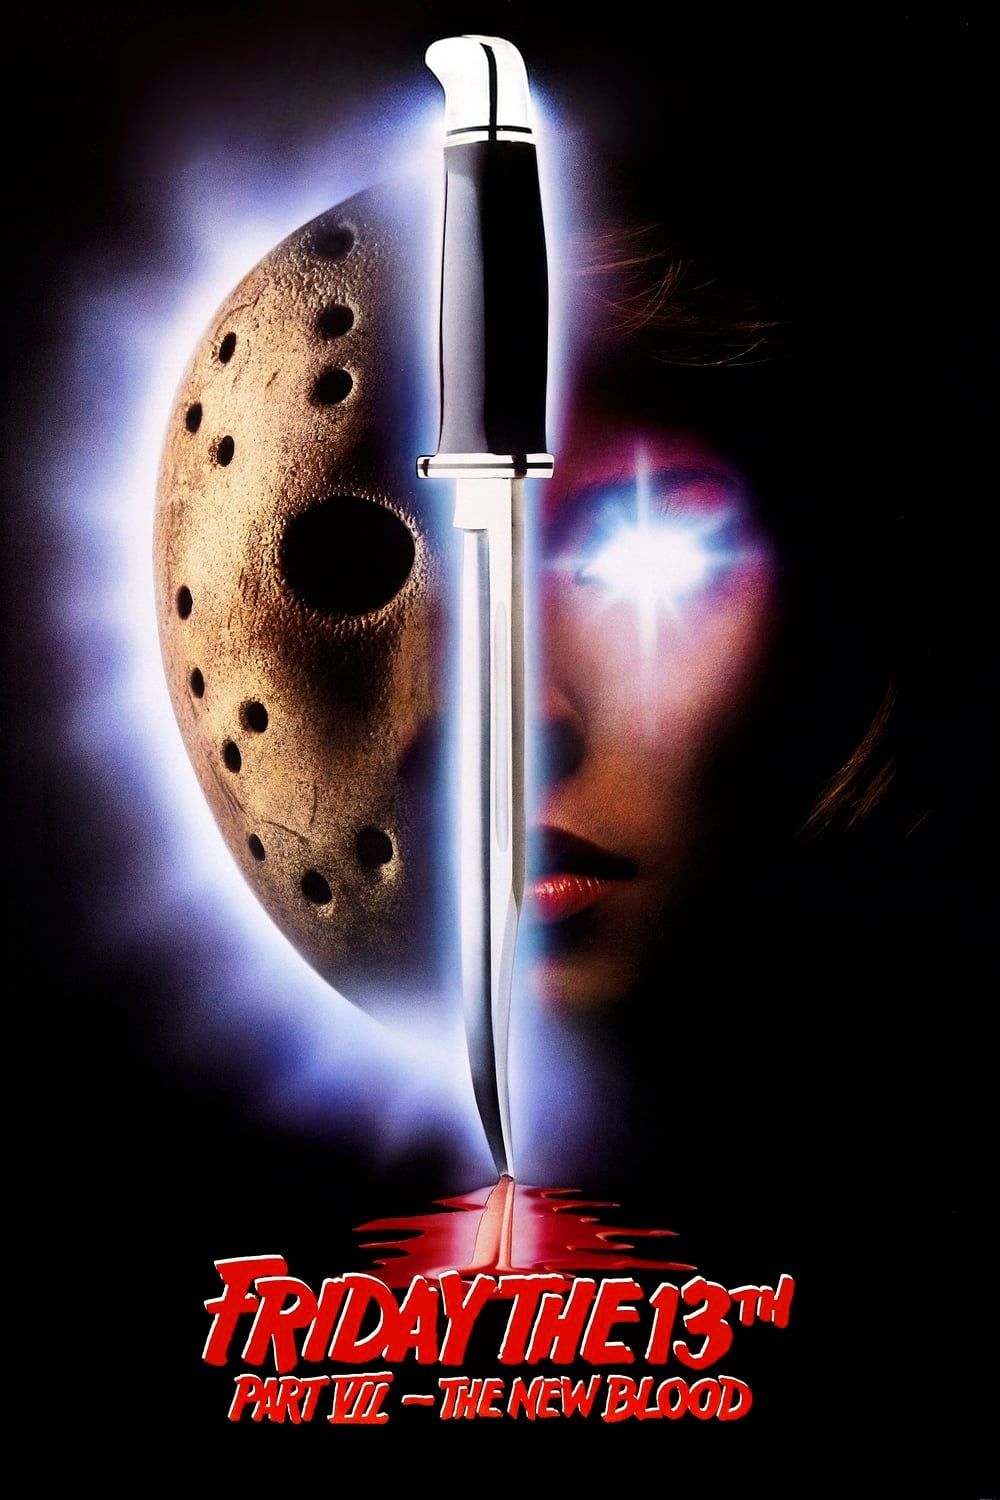 Friday the 13th Revisited Download | Retrogamer3